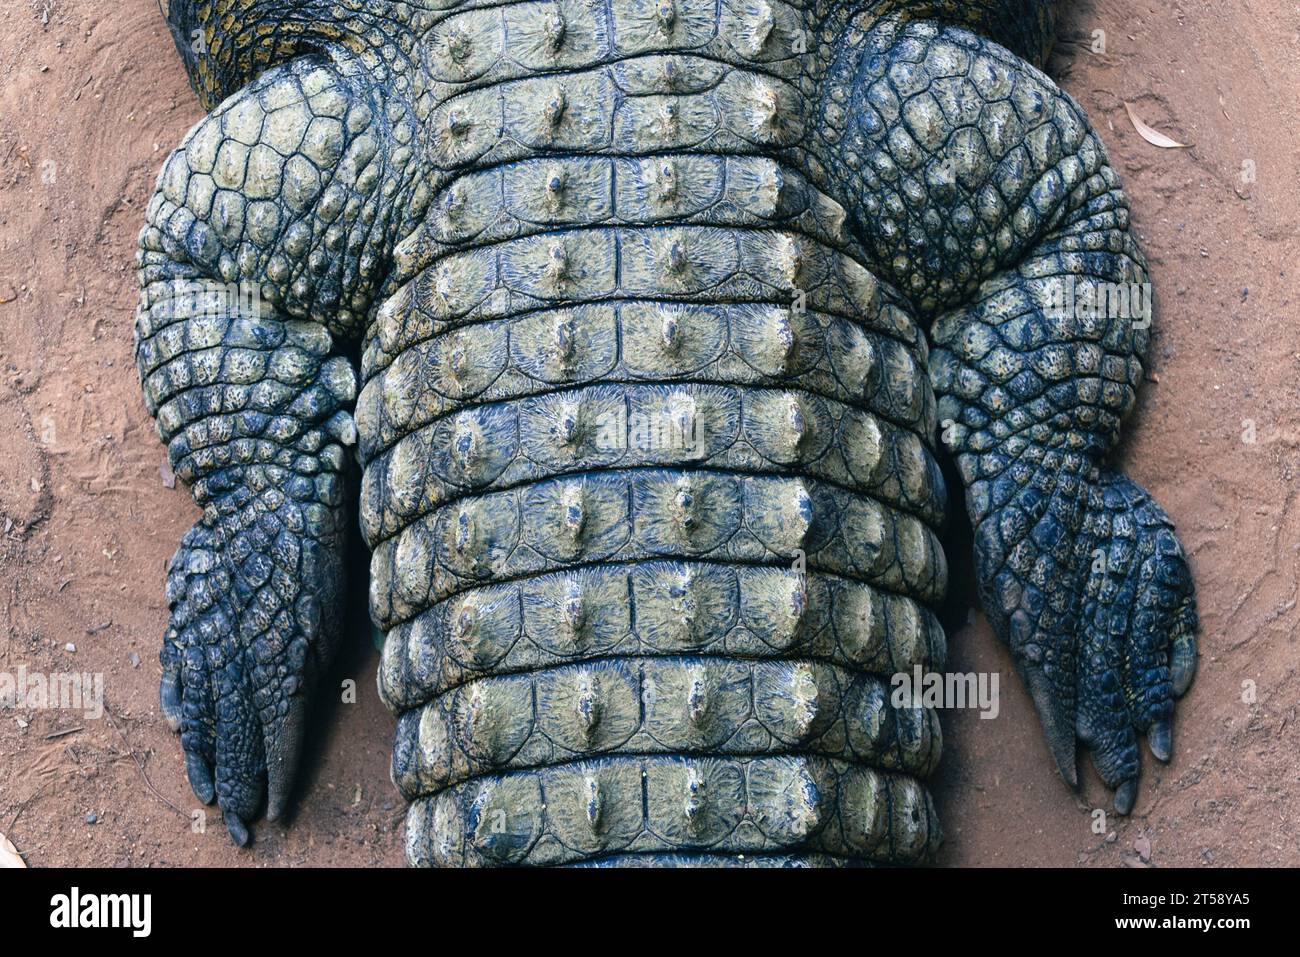 A view from above of the back legs of a crocodile in South Africa Stock Photo